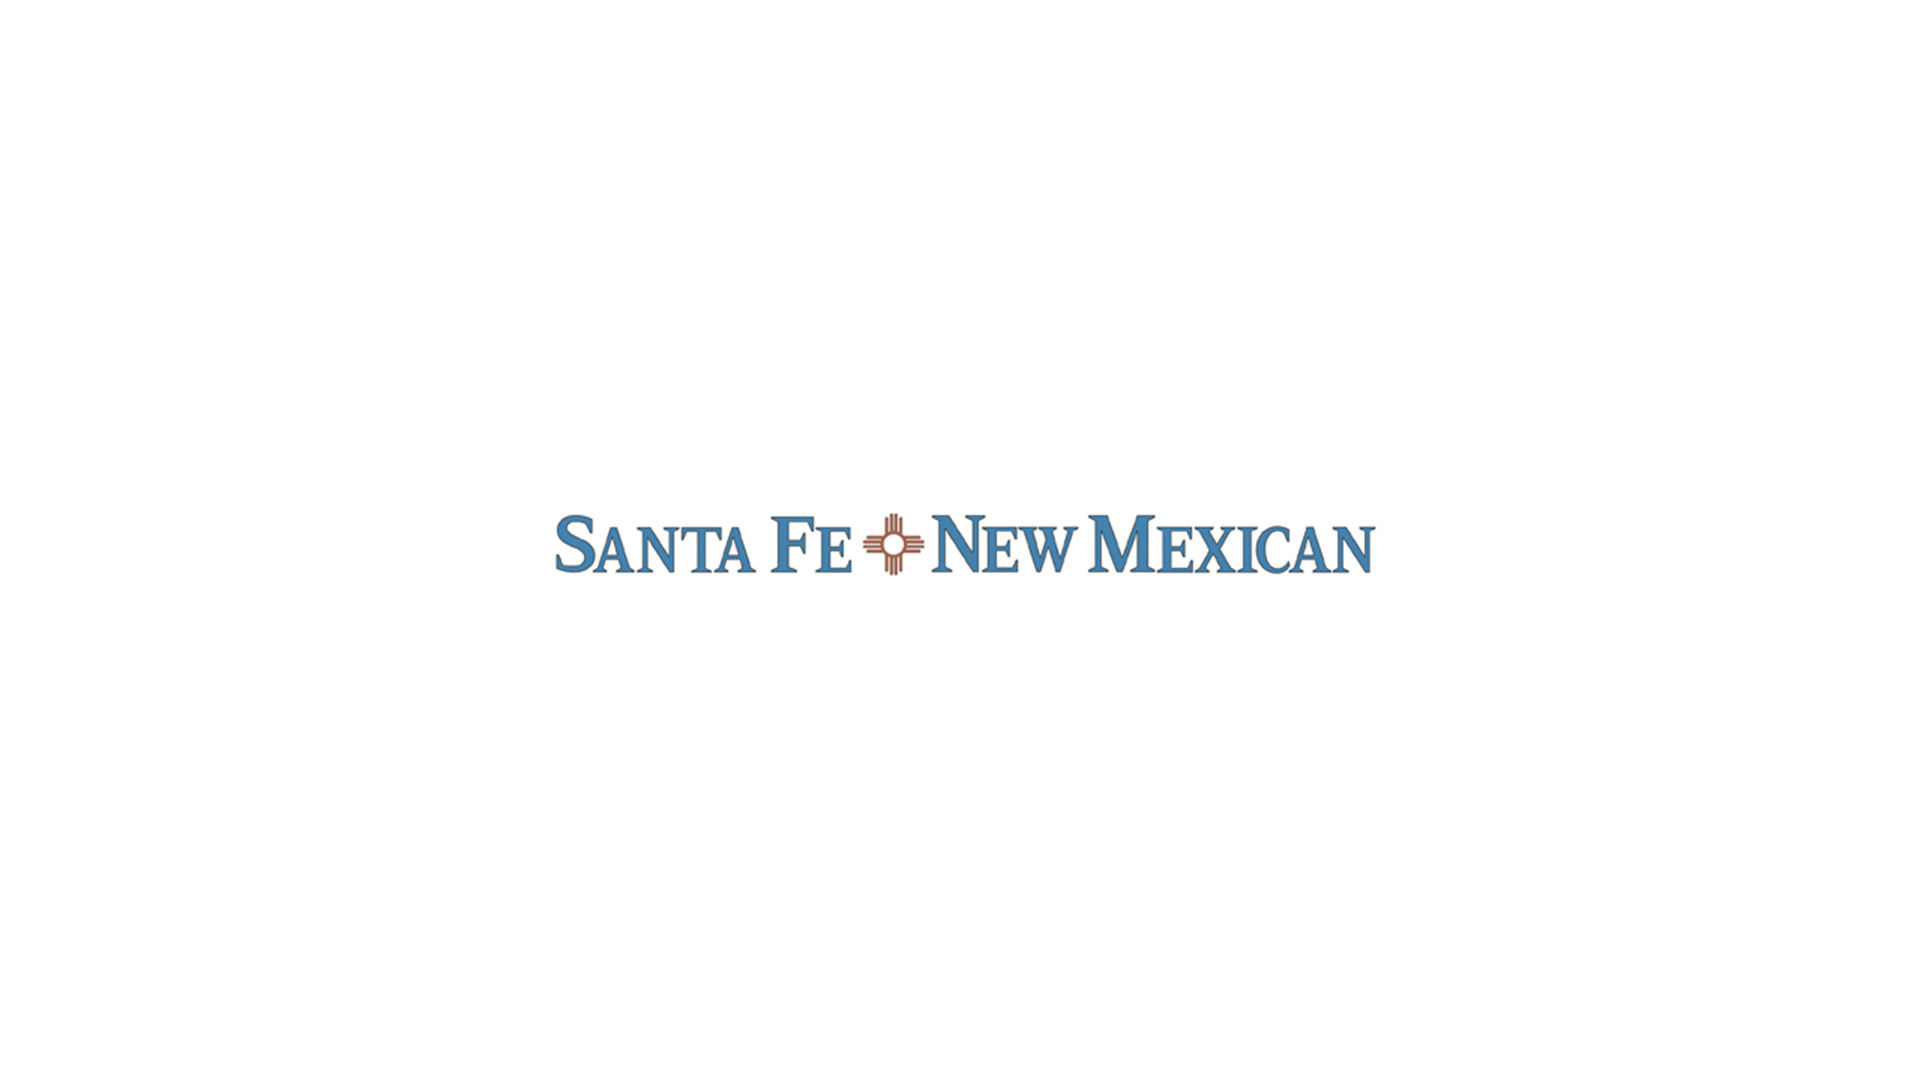 New Mexico workplace drug policies evolving